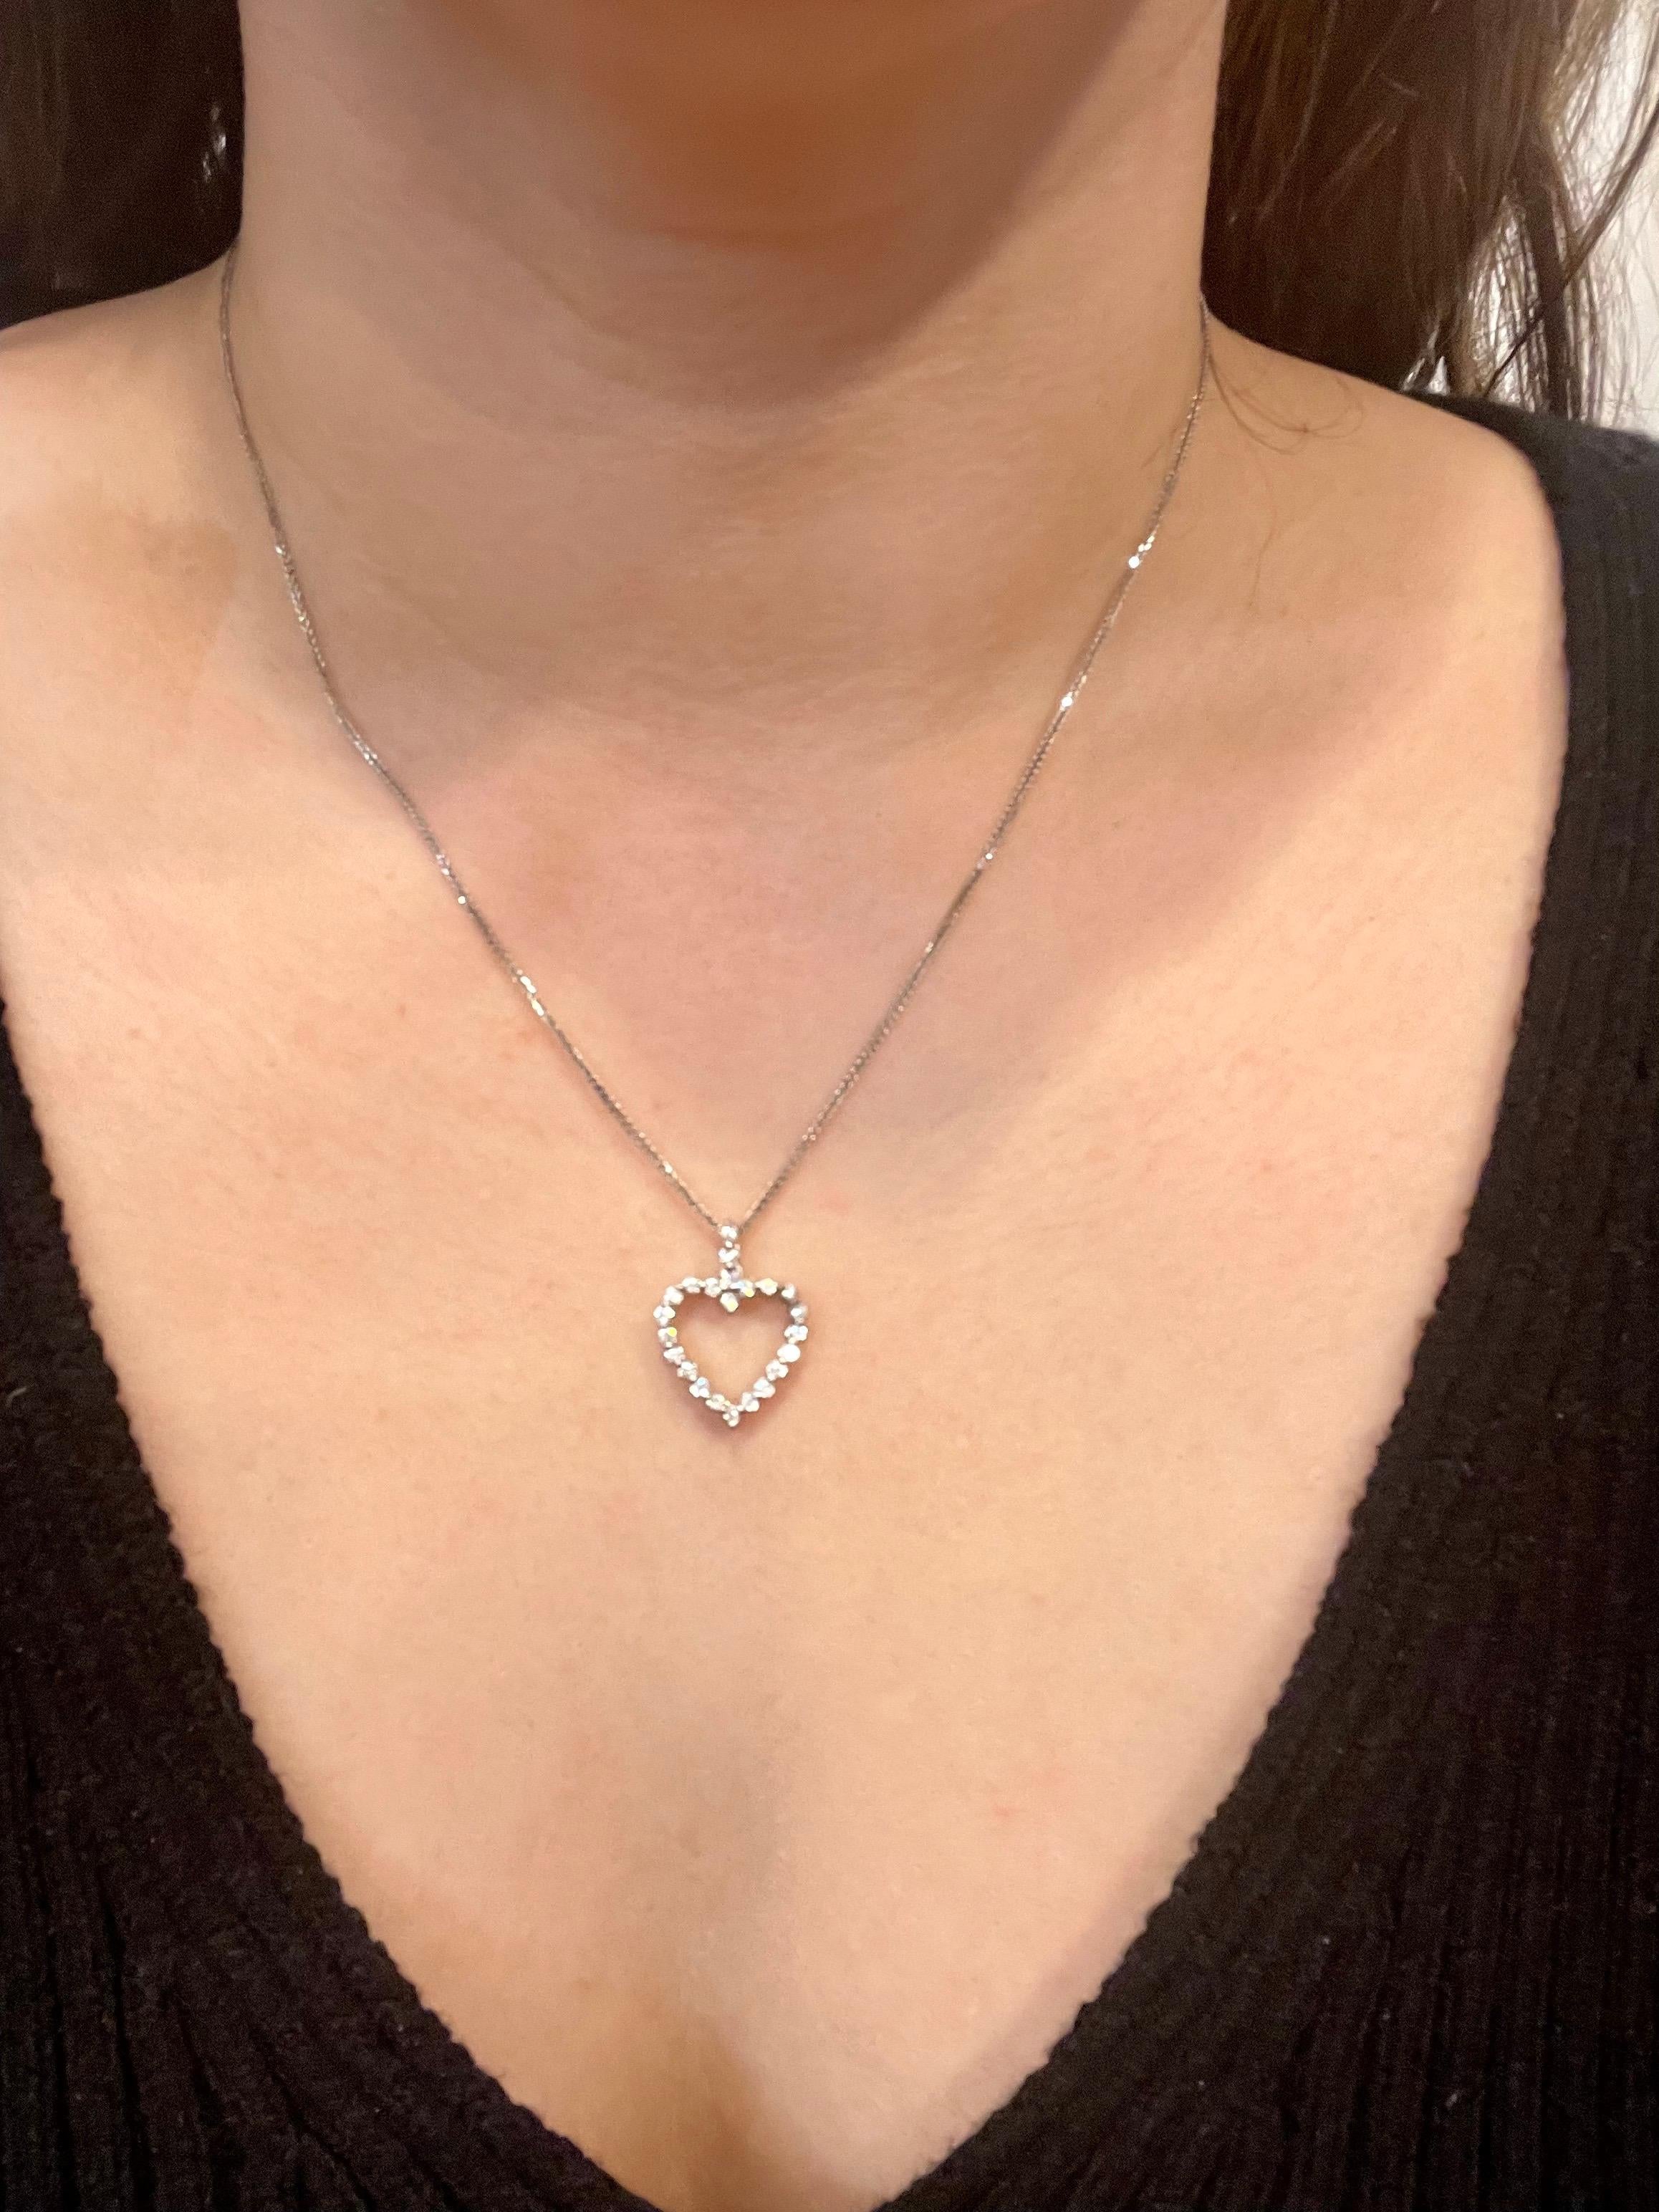 1 Carat Diamond Heart Pendant/ Necklace 14 Karat White Gold with Chain For Sale 8